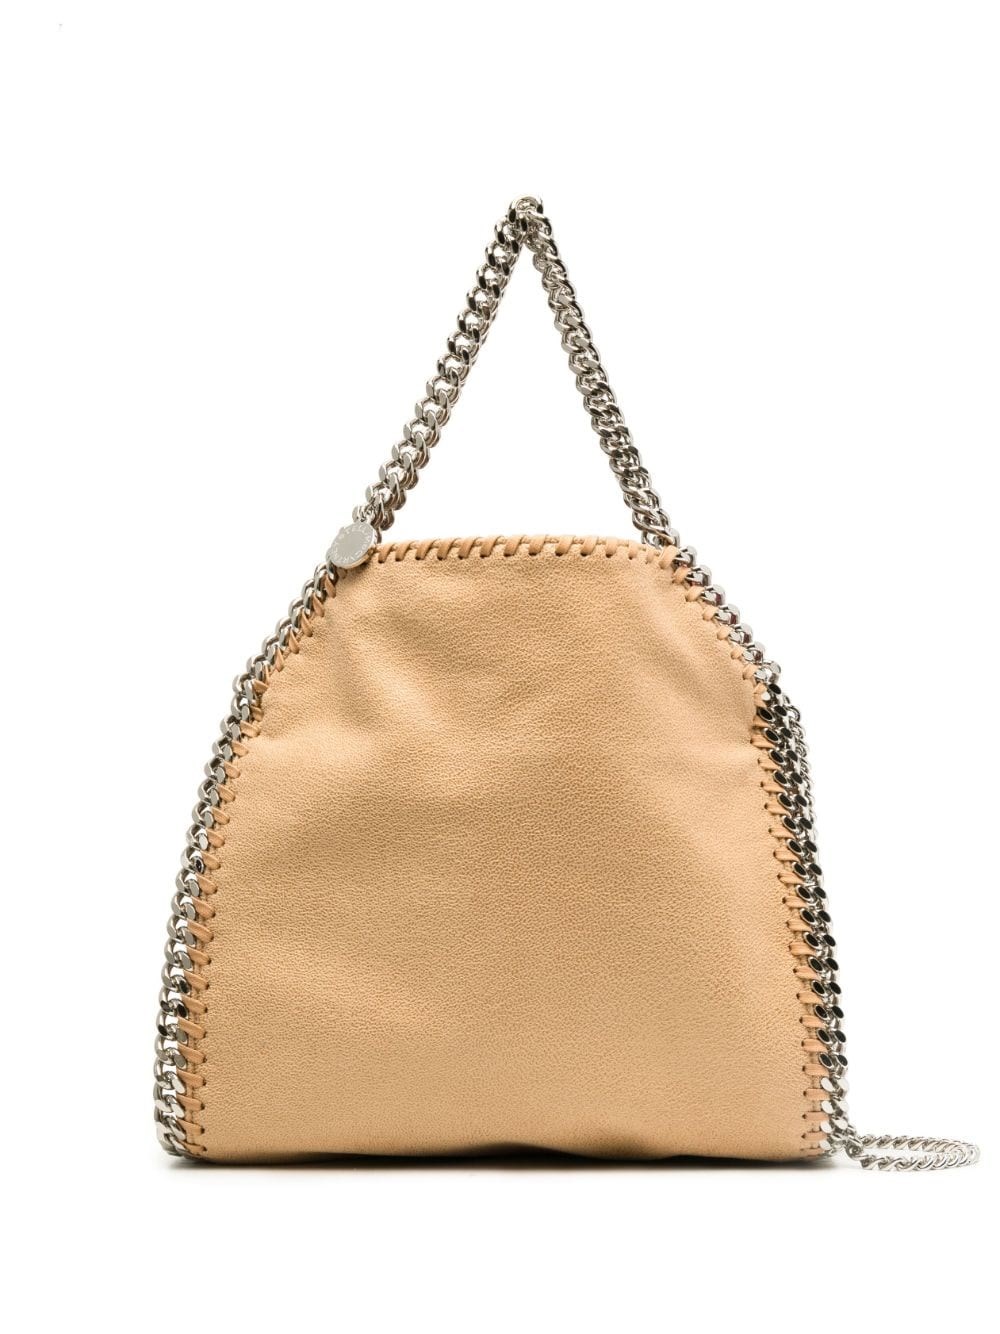 Stella Mccartney 3chain Tote Eco Shaggy Deer In Nude & Neutrals